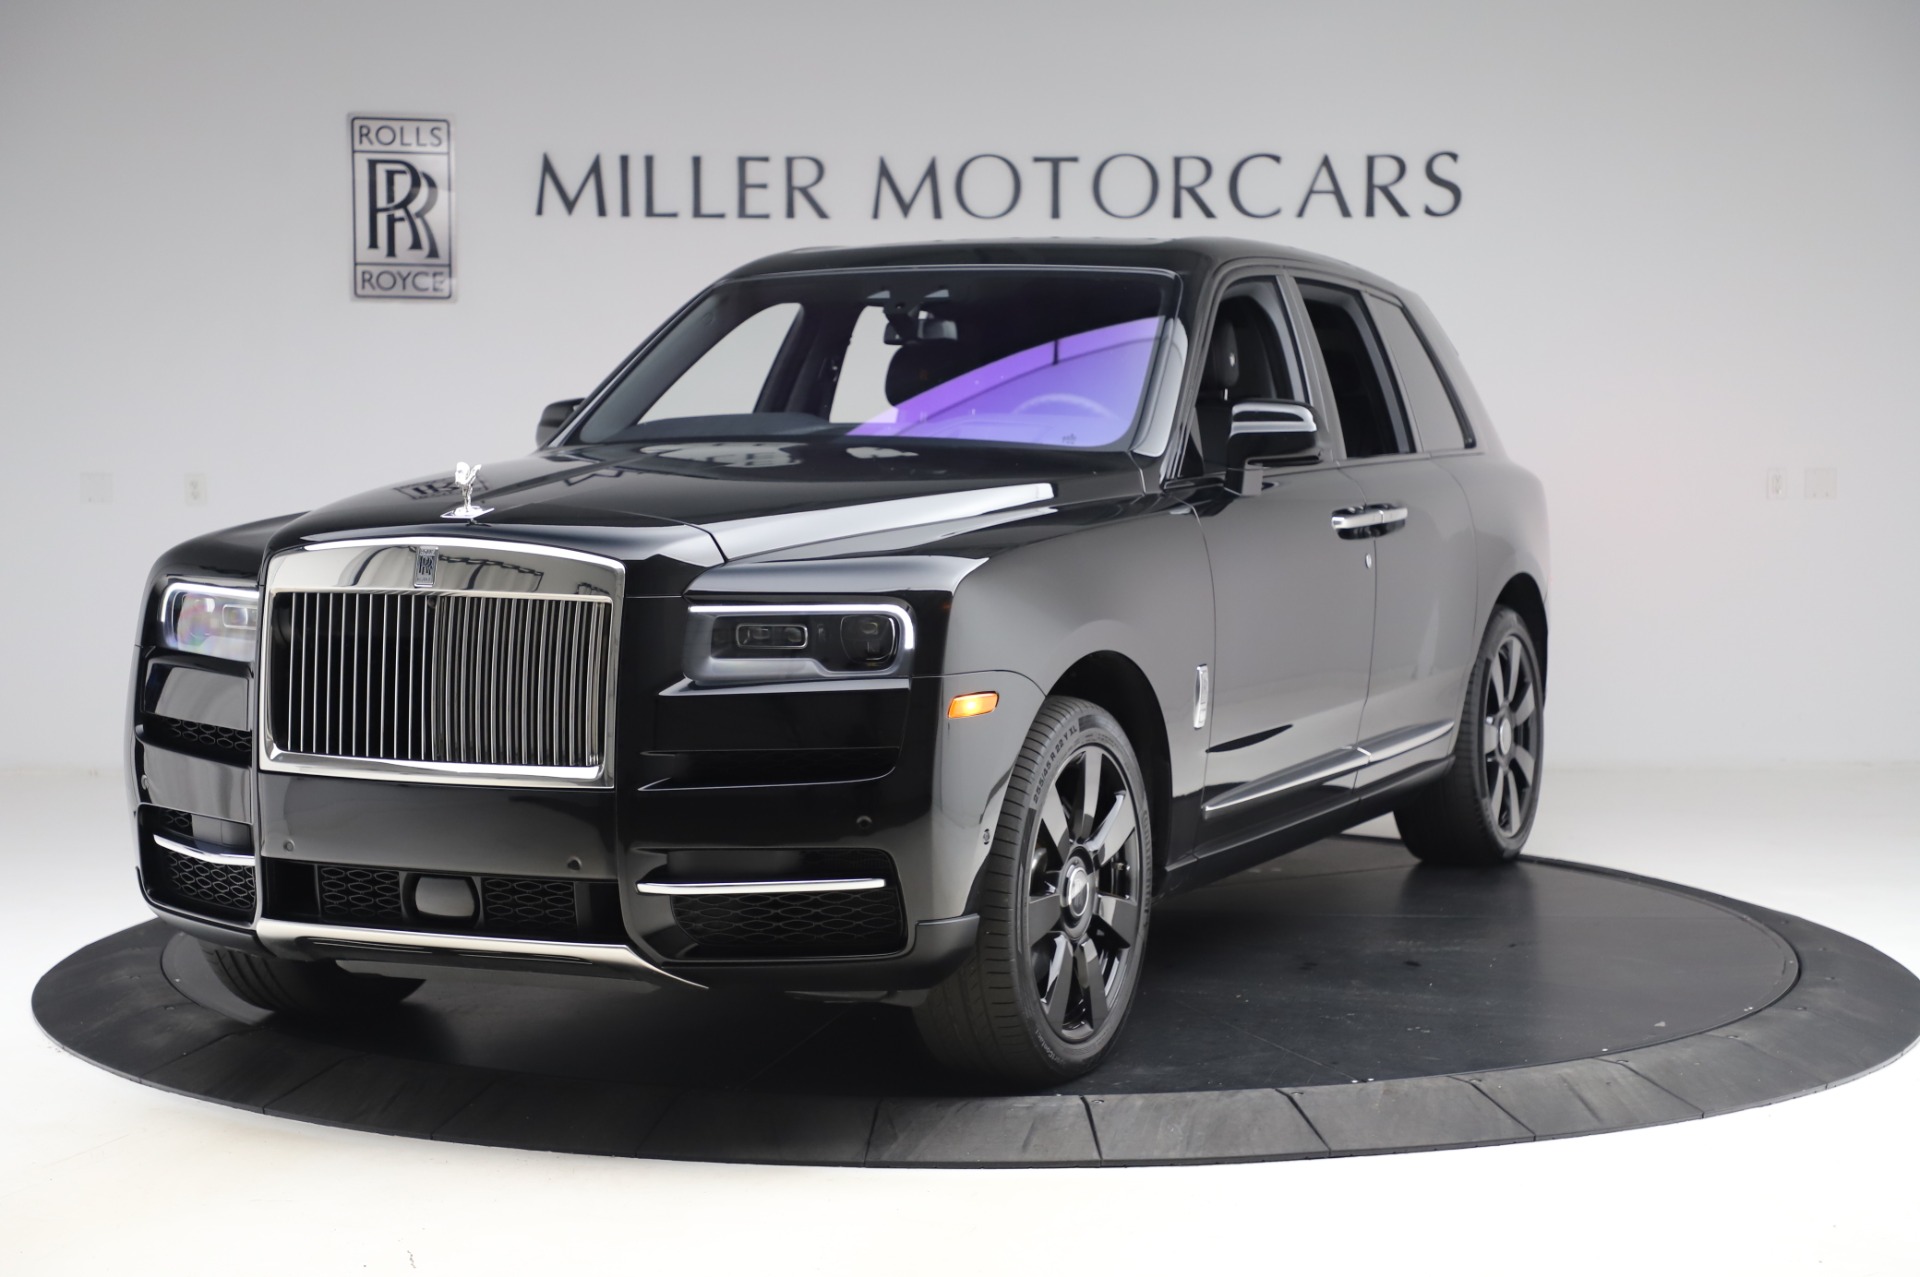 2020 Rolls-Royce Cullinan Prices, Reviews, and Photos - MotorTrend